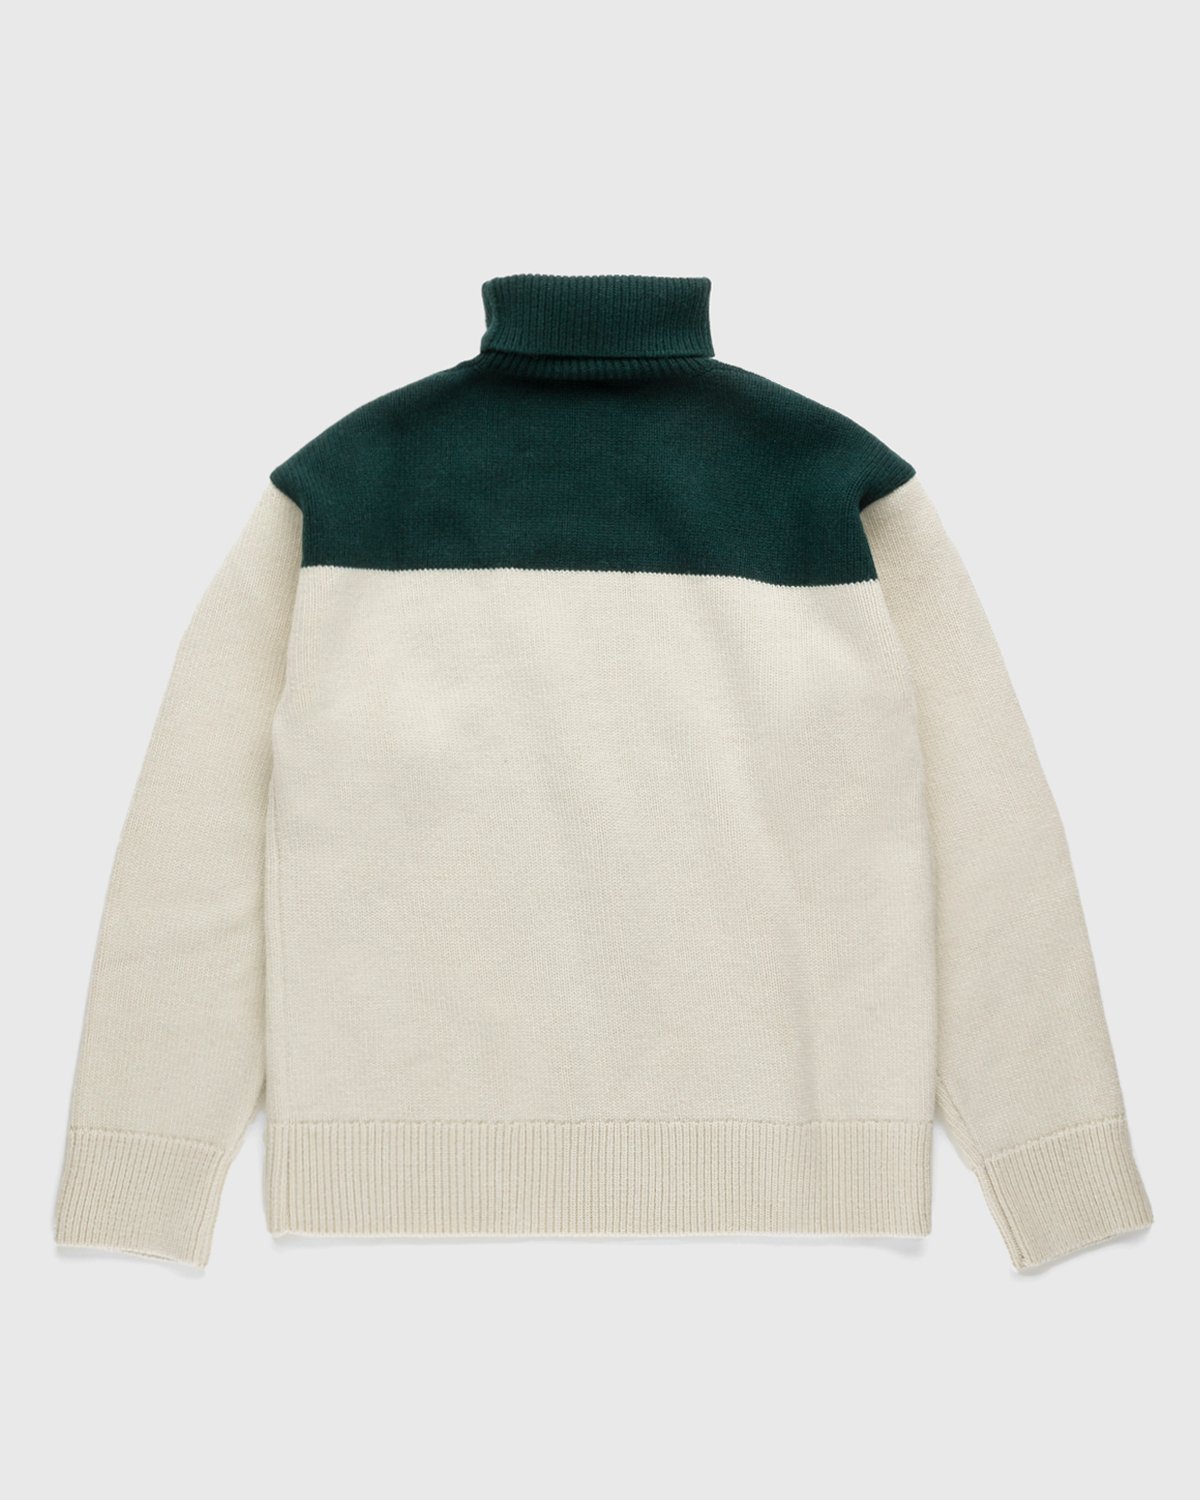 Jil Sander - Cashmere High Neck Knit Sweater Green - Clothing - Green - Image 2